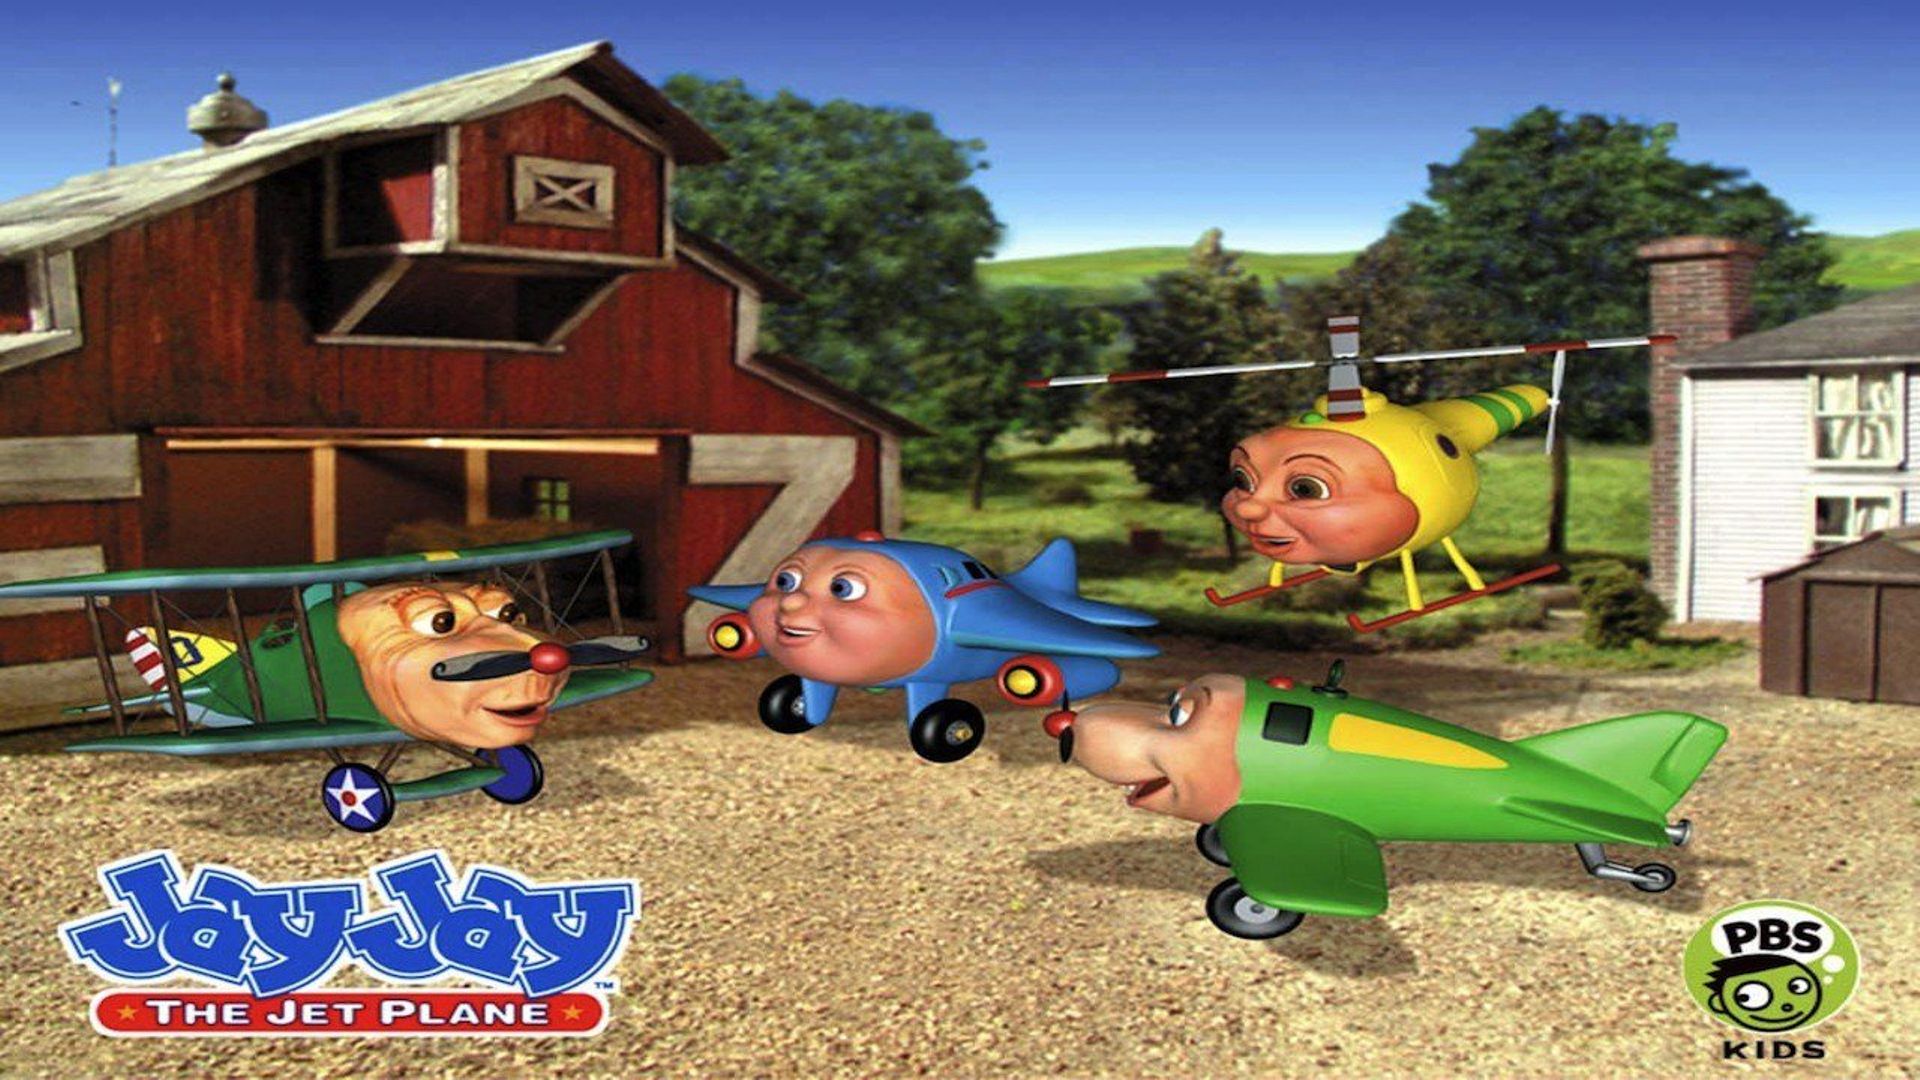 Jay Jay the Jet Plane to Watch Every Episode Streaming Online Available in the UK